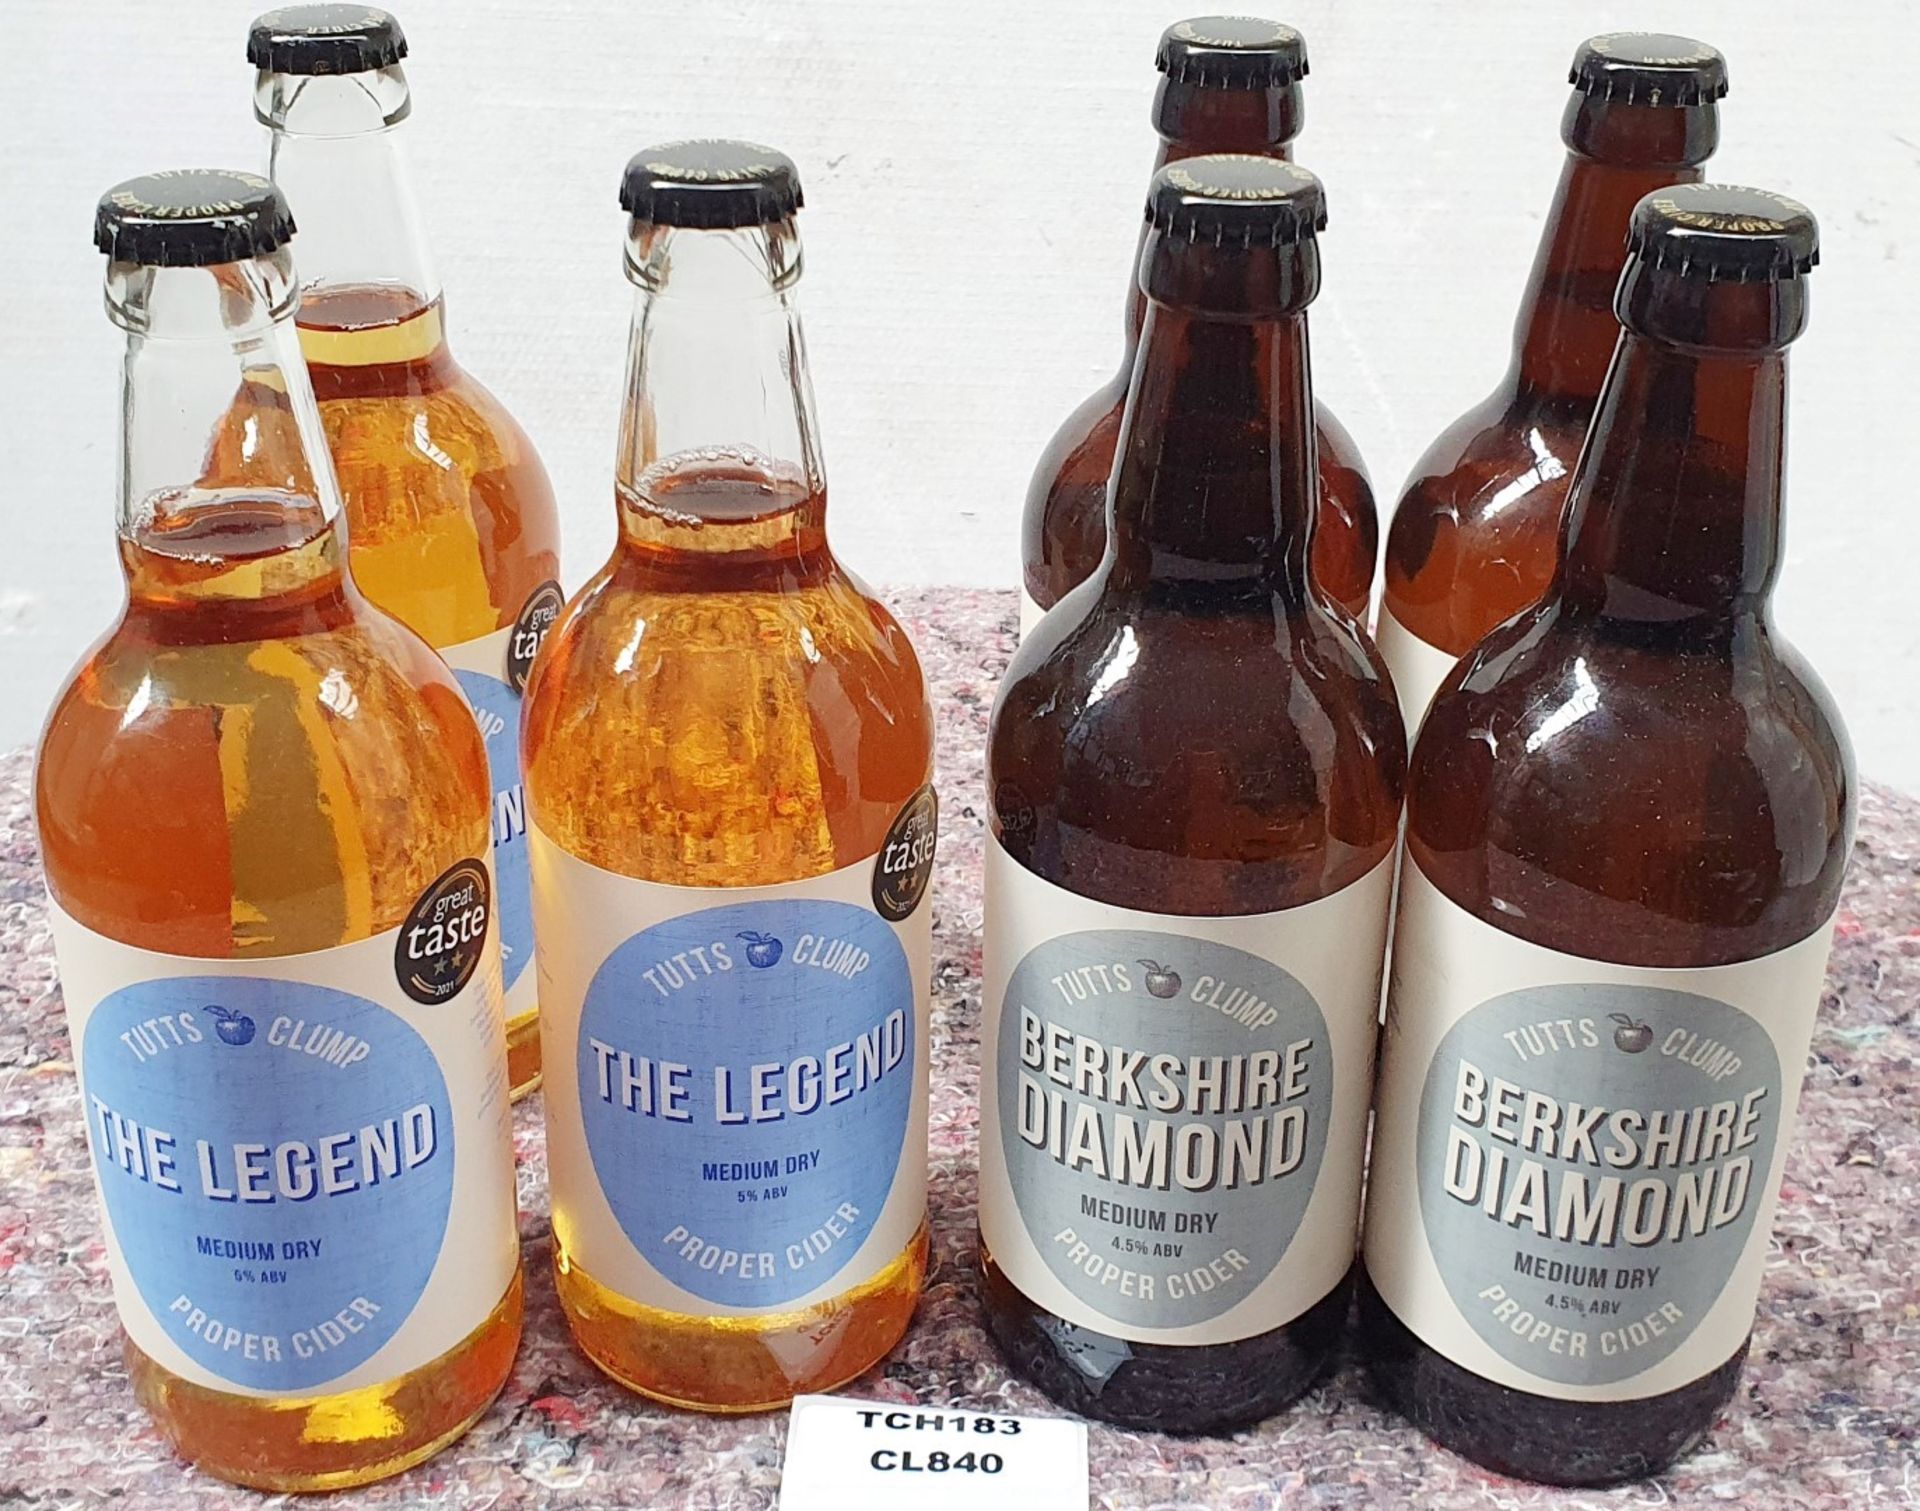 7 x Bottles of Tutts Clump Medium Dry Cider - Includes The Legend 5% and Berkshire Diamond 4.5% - Image 4 of 4